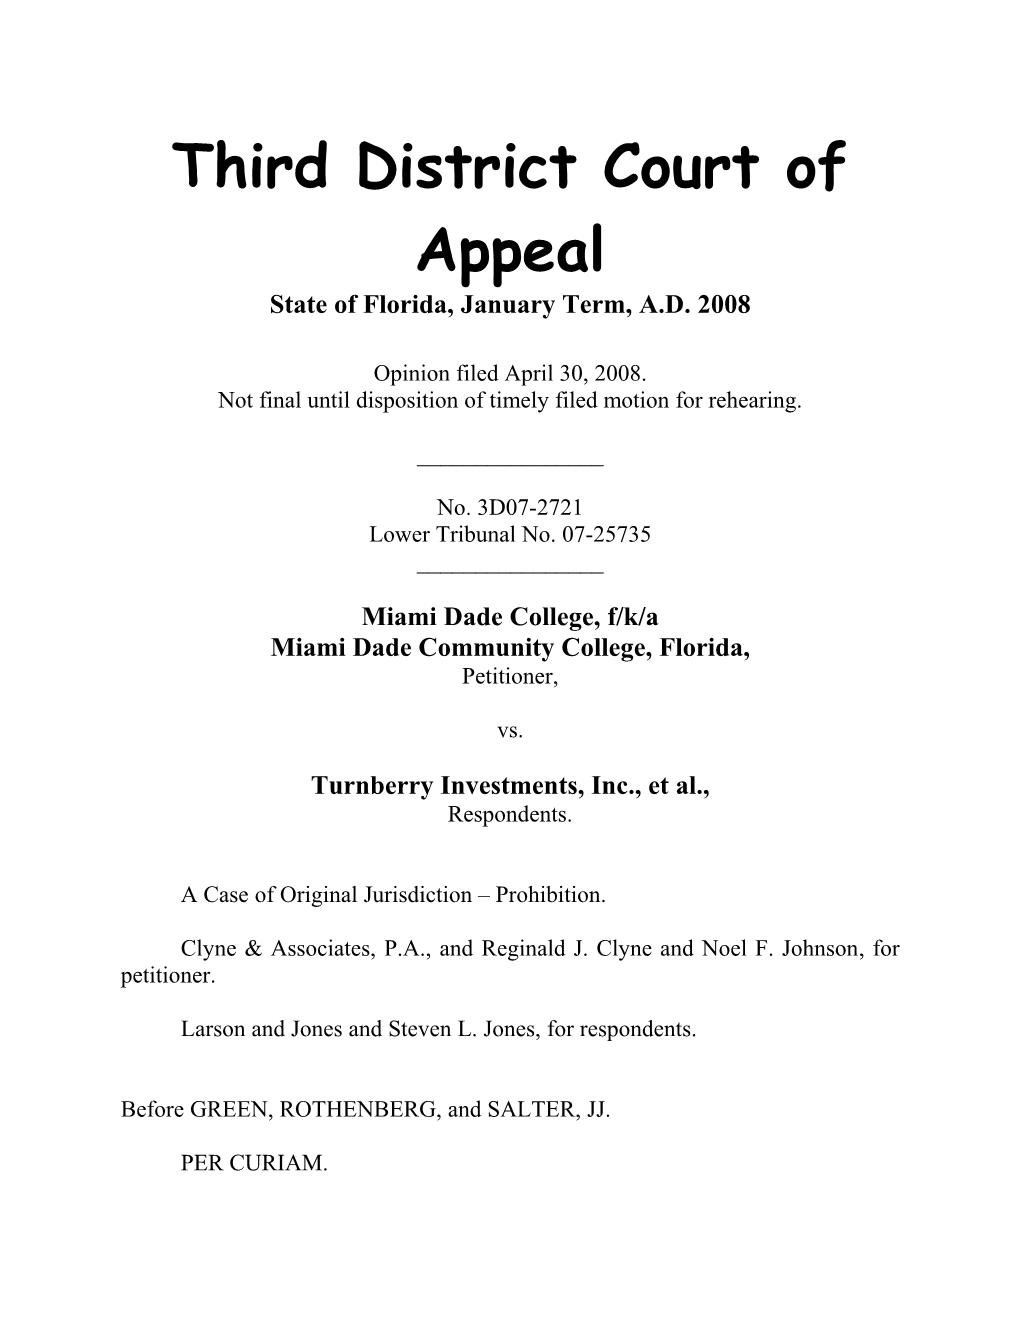 Third District Court of Appeal s4